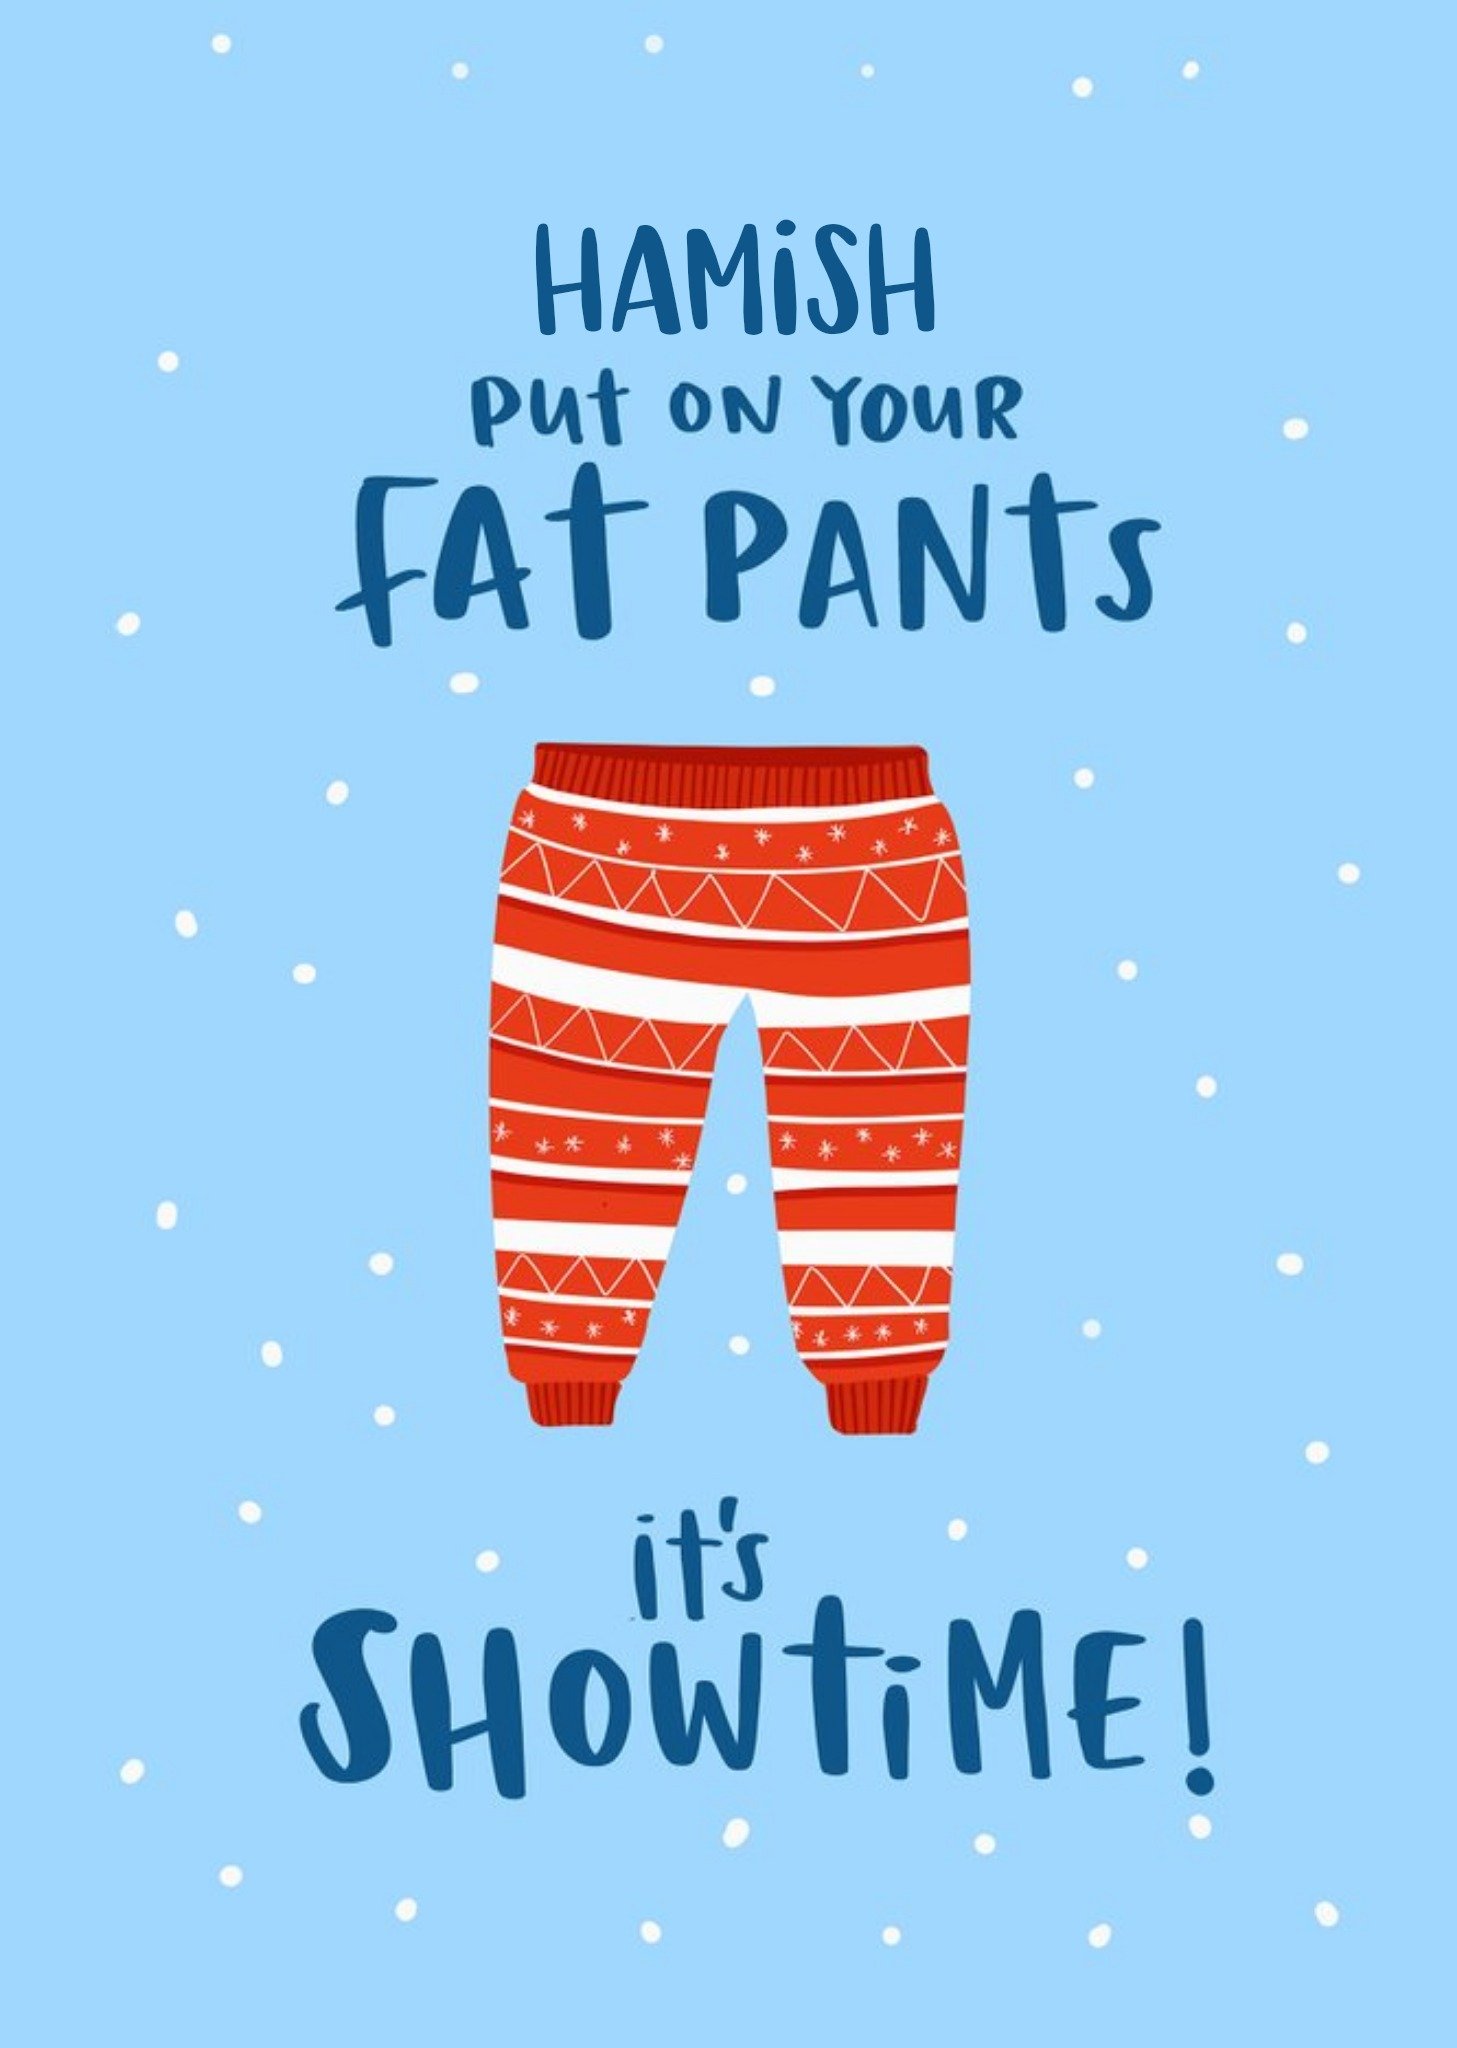 Moonpig Modern Funny Put On Your Fat Pants It's Showtime Christmas Card Ecard